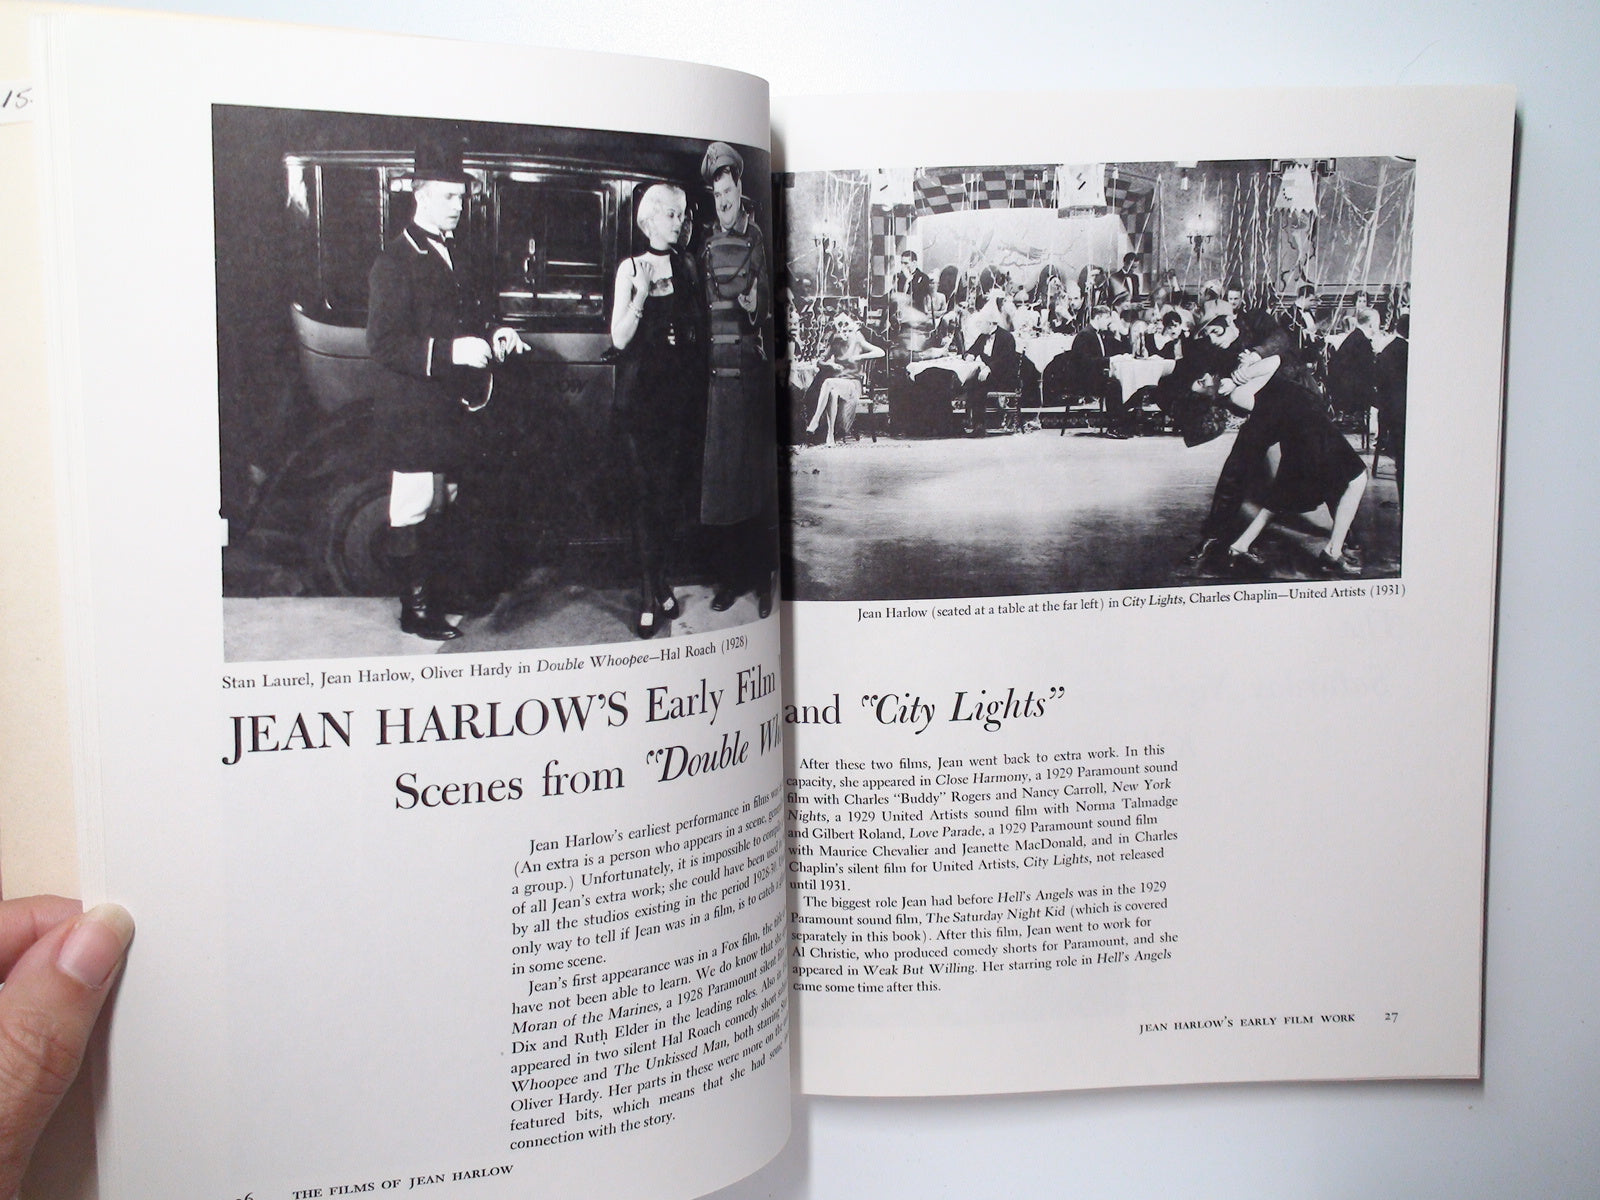 The Films of Jean Harlow, Michael Conway, Illustrated, 4th Ed, 1974